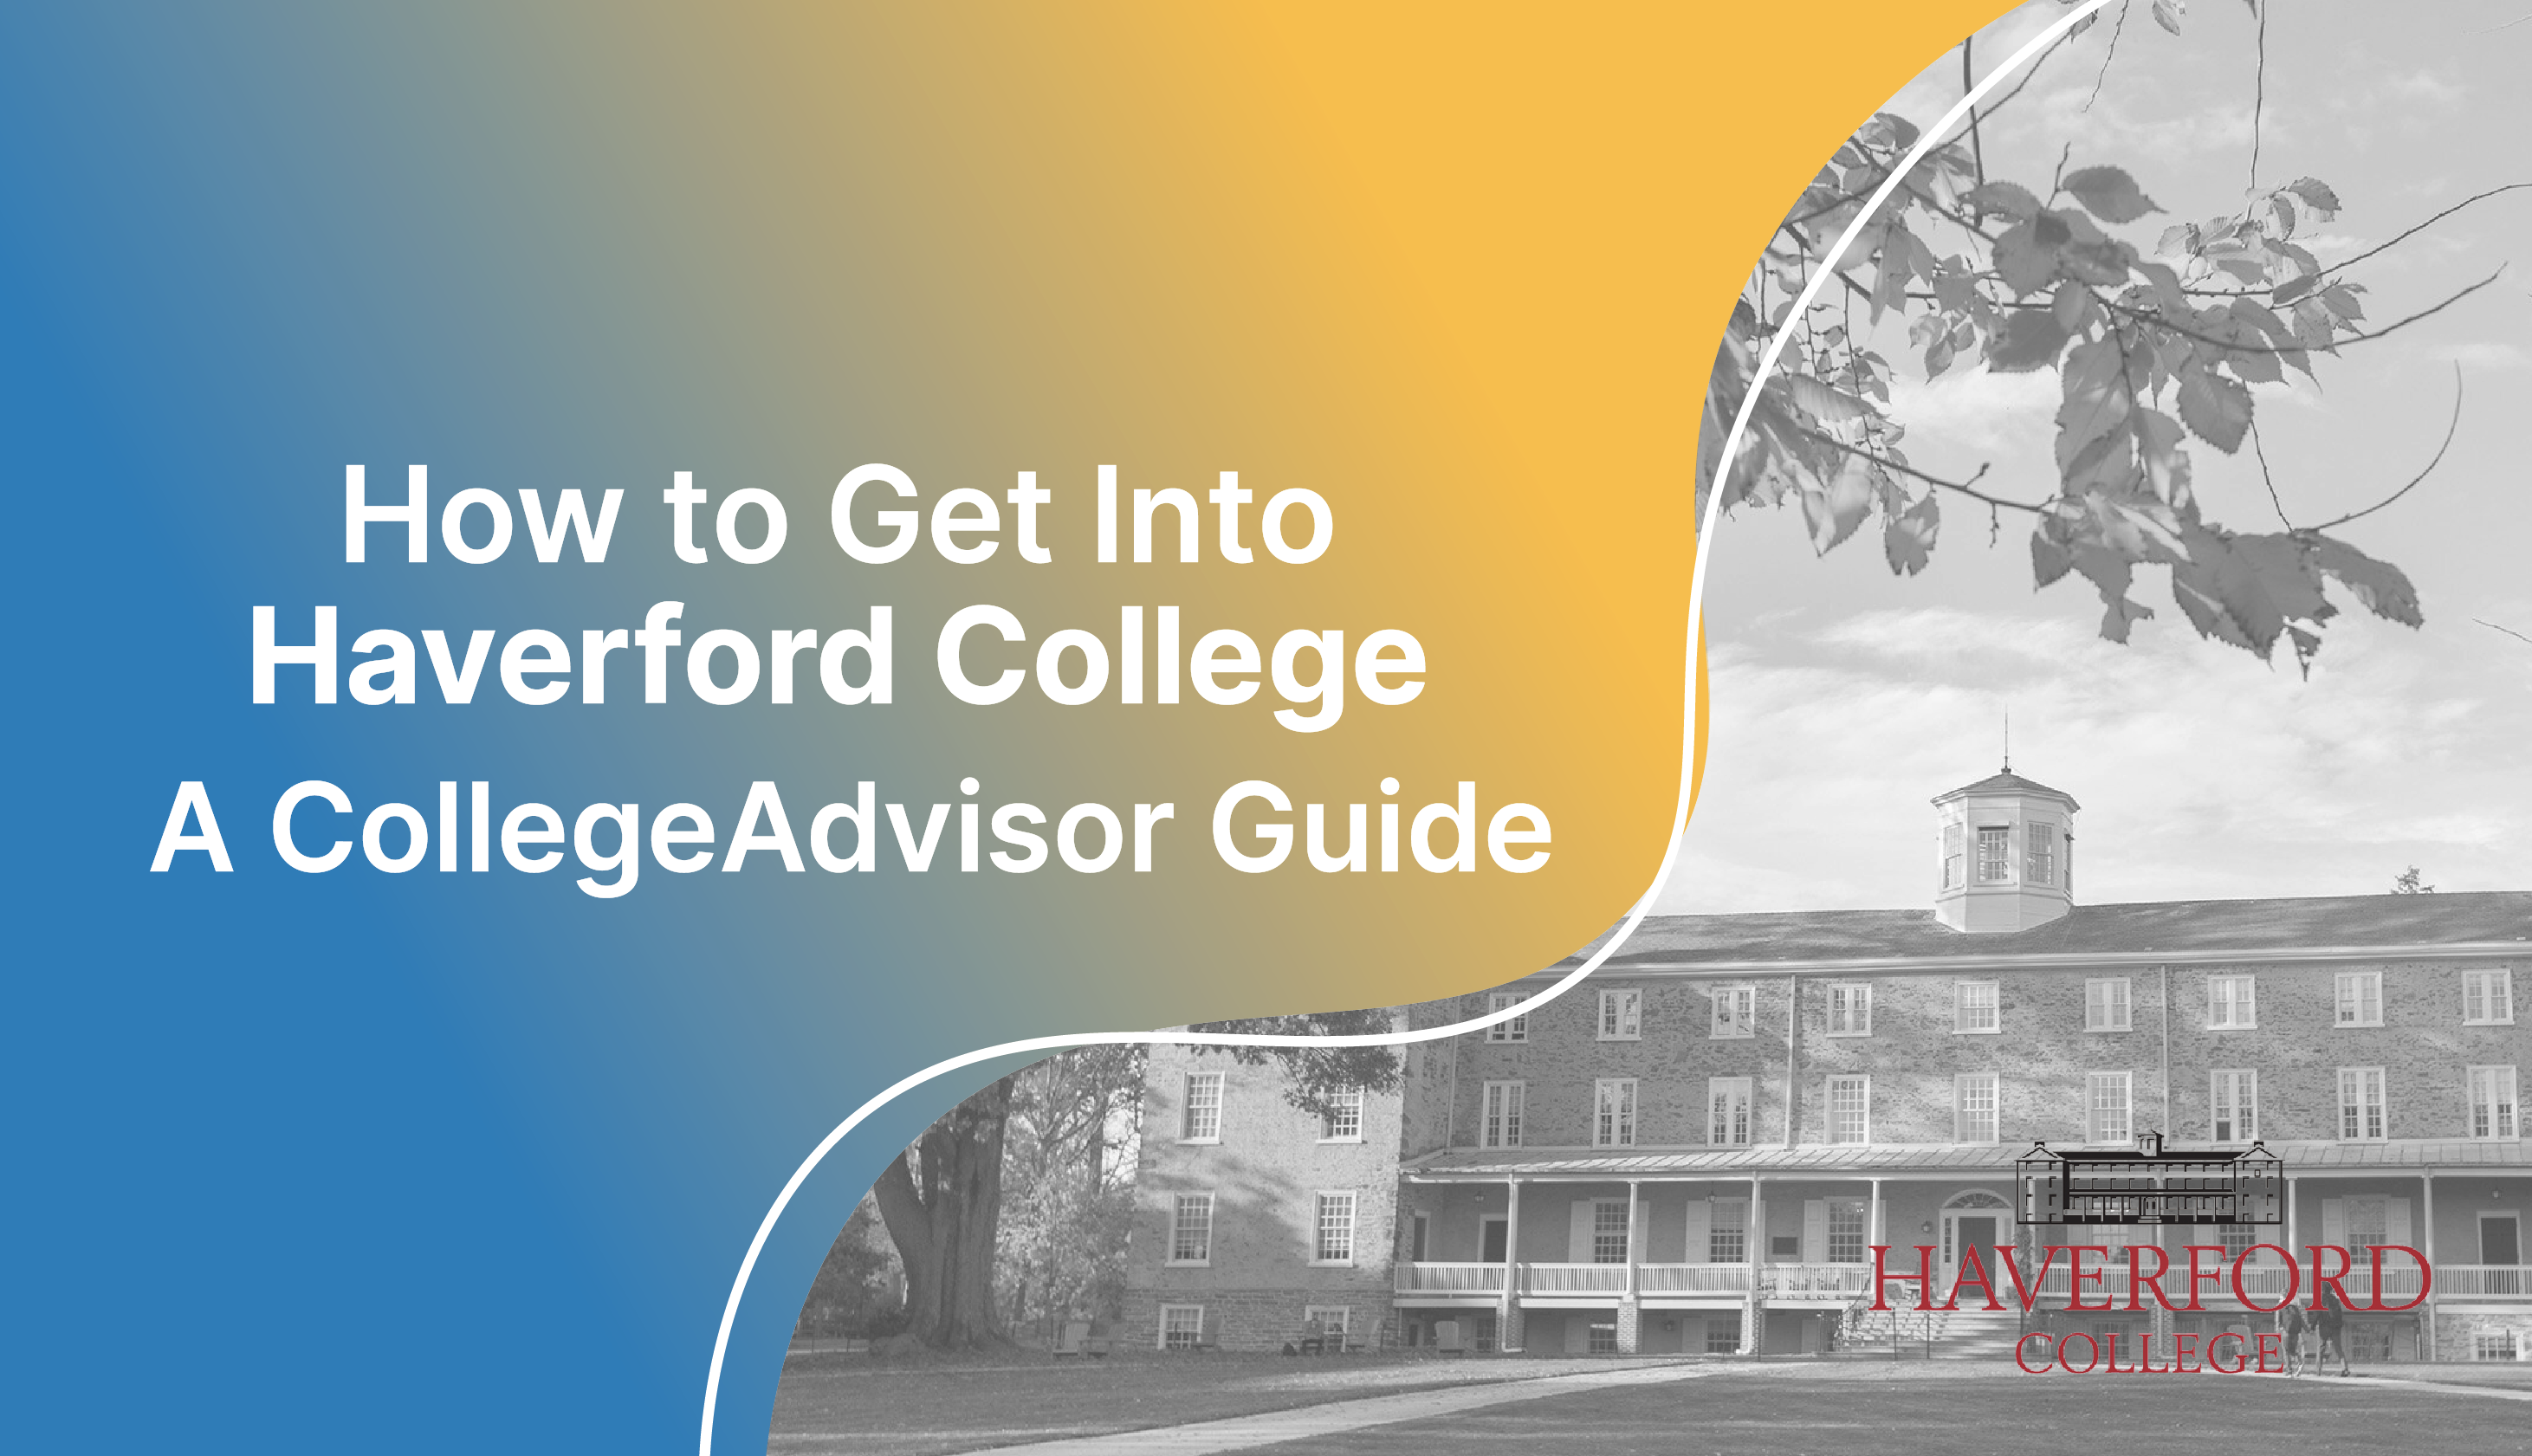 How to Get Into Haverford College Guide